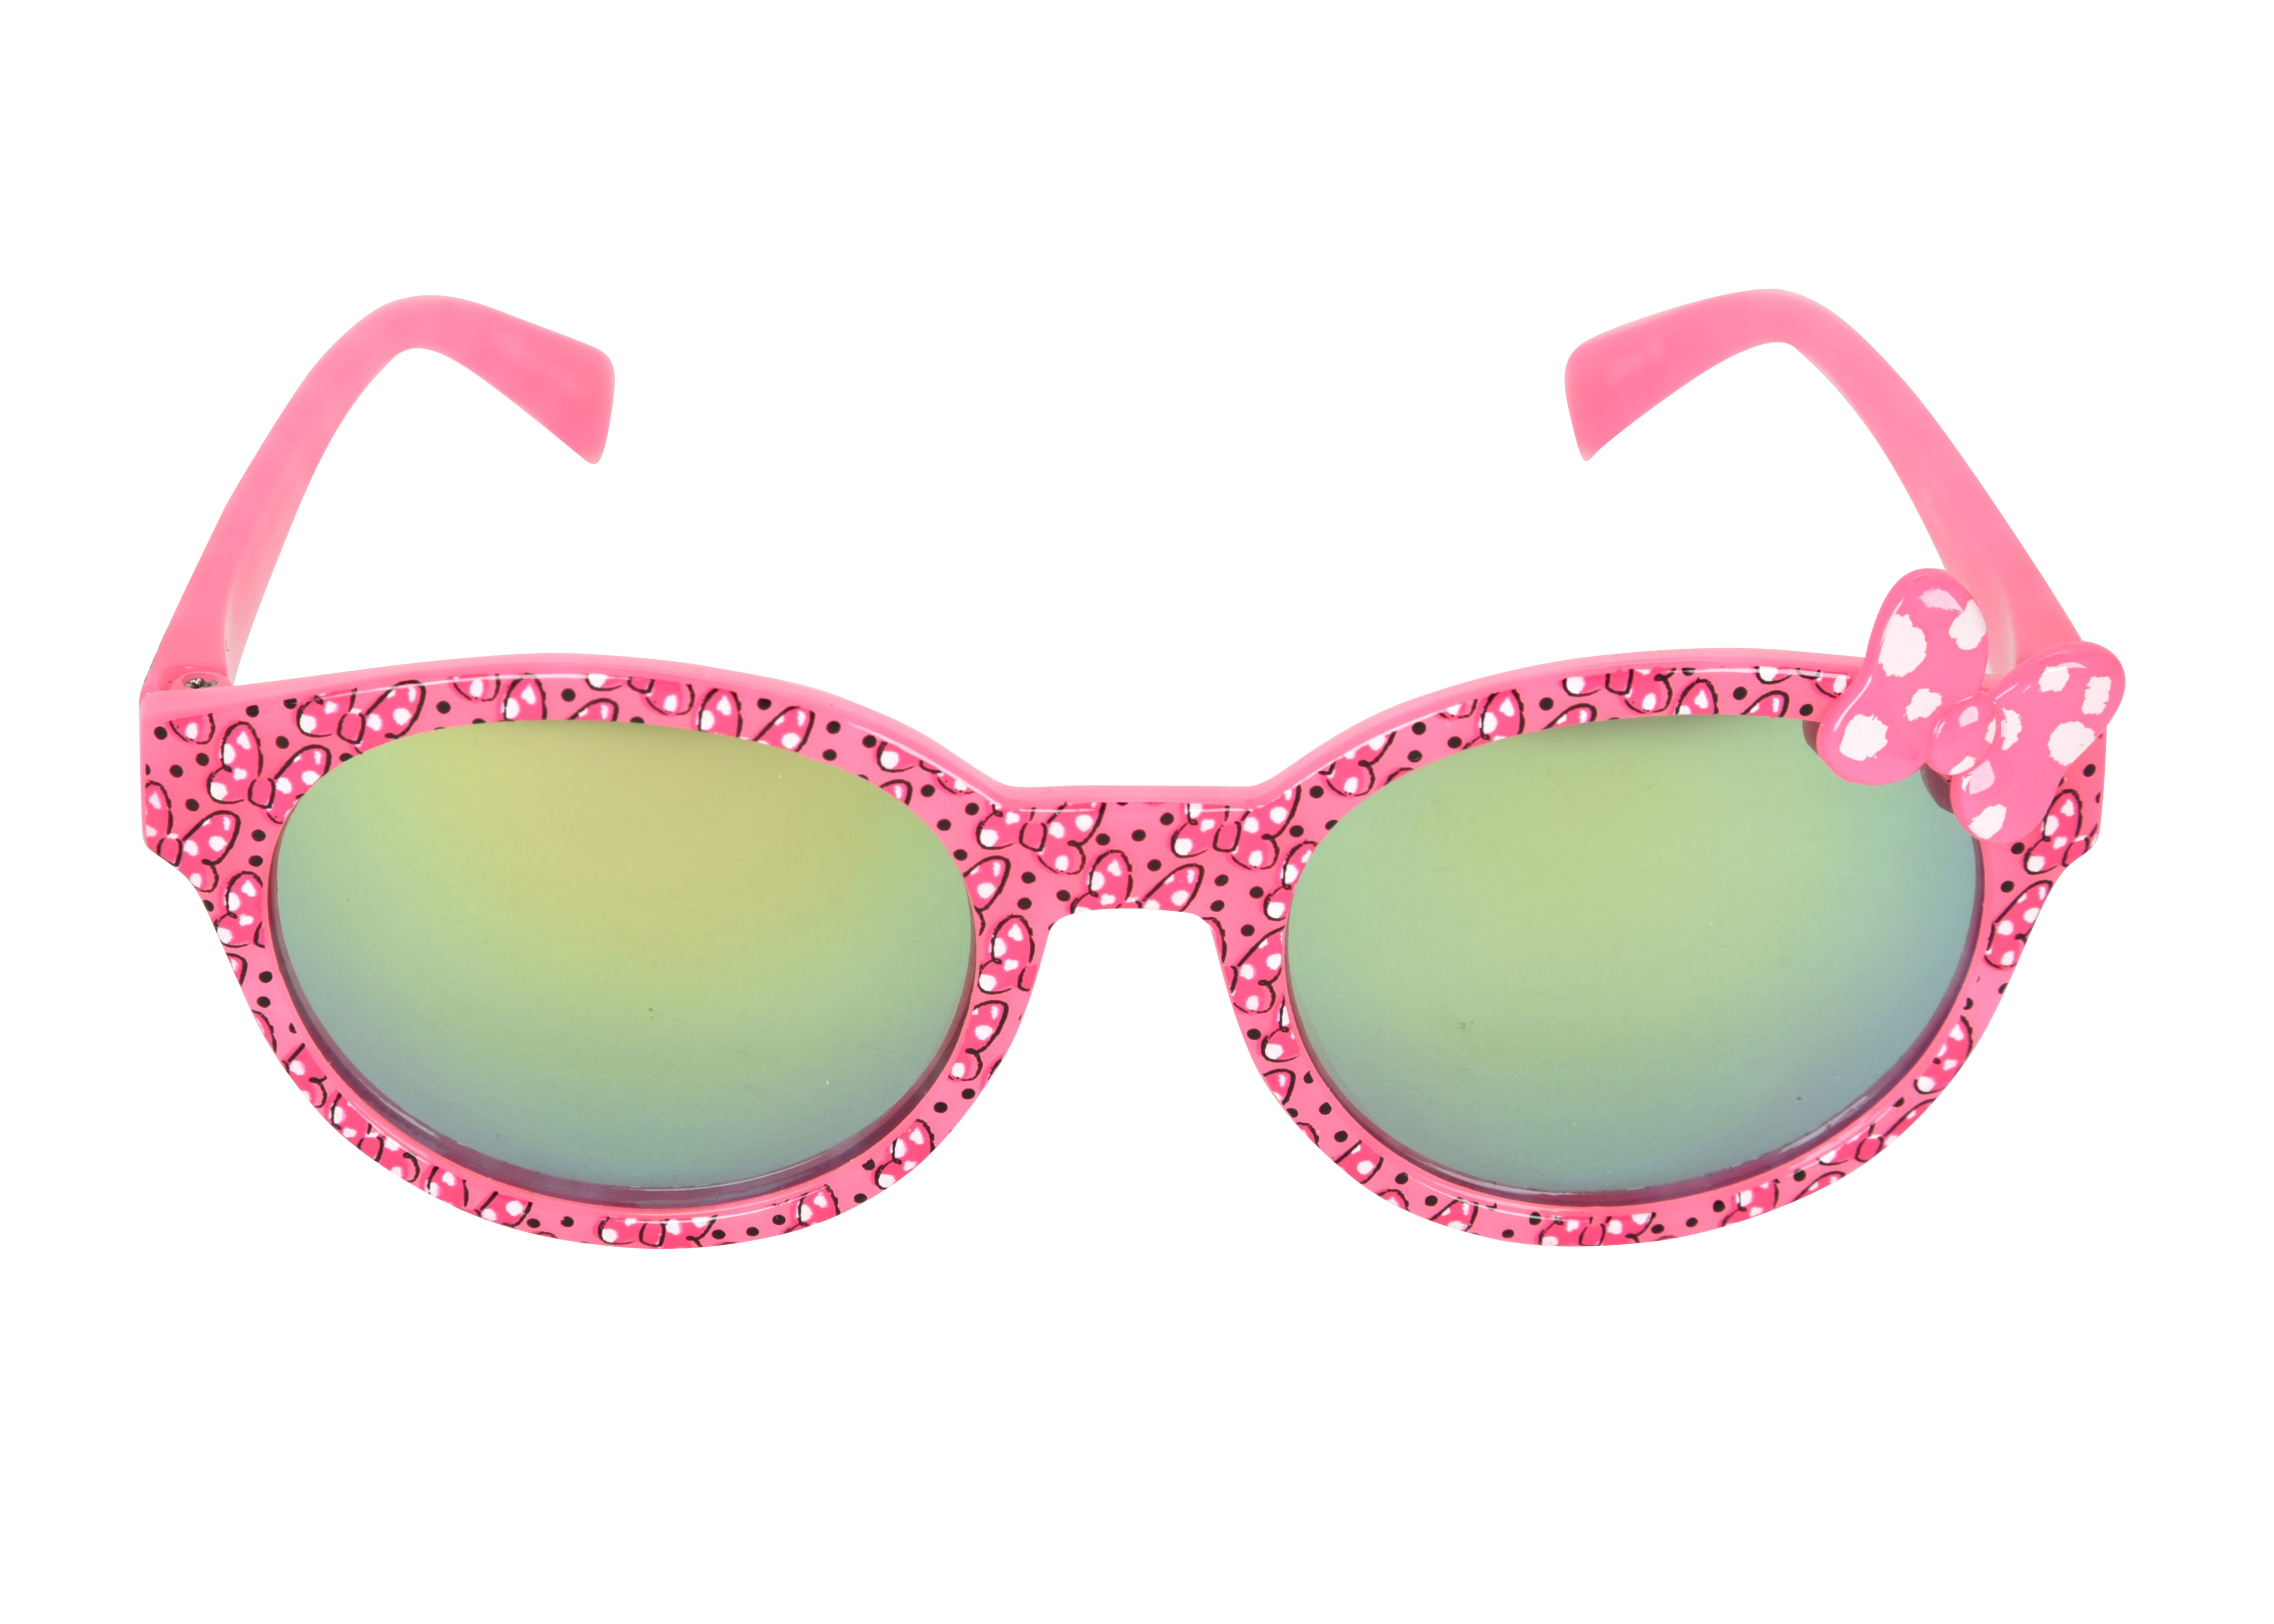 Disney Minnie Mouse Girl's Brow Bar Sunglasses Pink - image 2 of 3